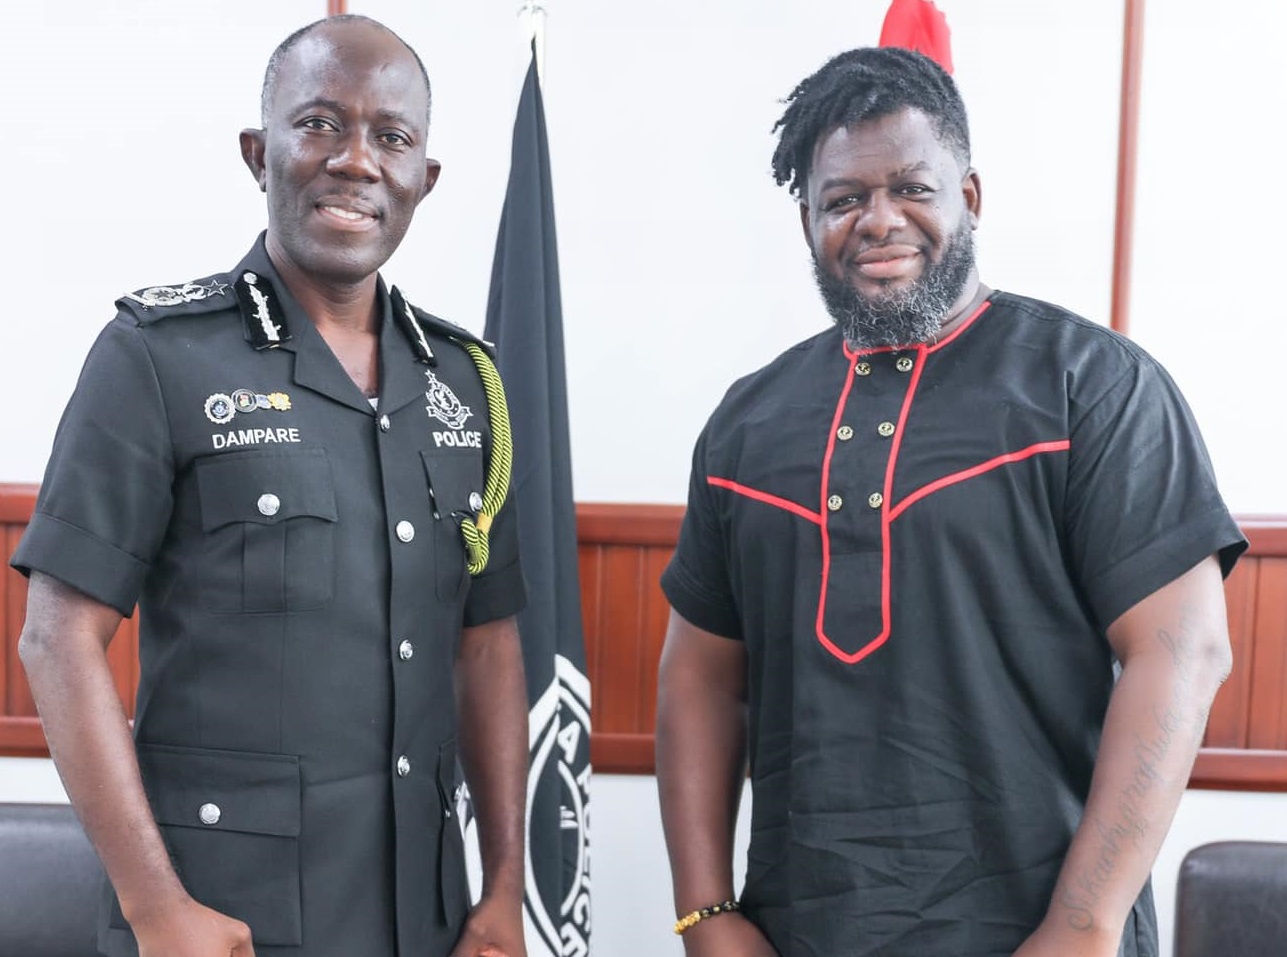  ‘Dr. George Akuffo Dampare Embodies The Phrase Service With Integrity’ – Bullgod Writes After Meeting IGP For This Reason